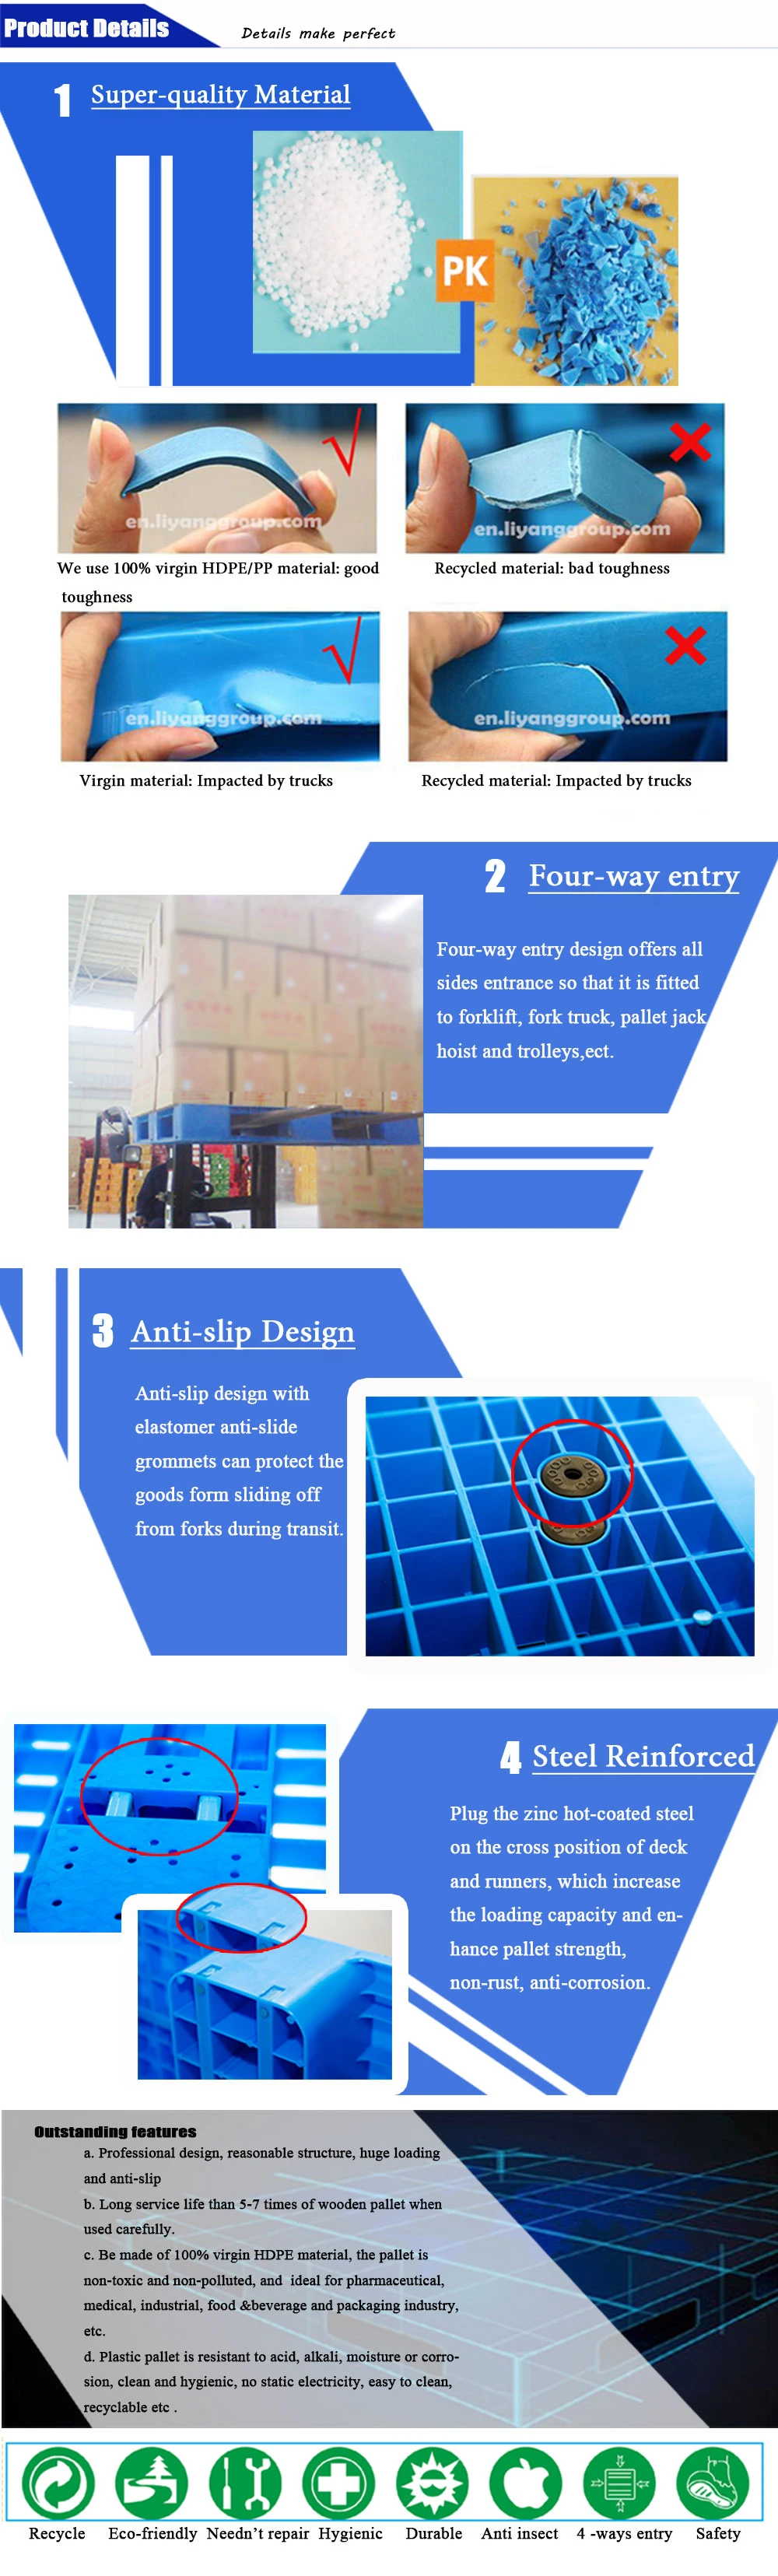 1111 Hygienic Pure HDPE Warehouse Export Used Plastic Pallet Reinforced Recycled Durable Pallet with Cheap Price